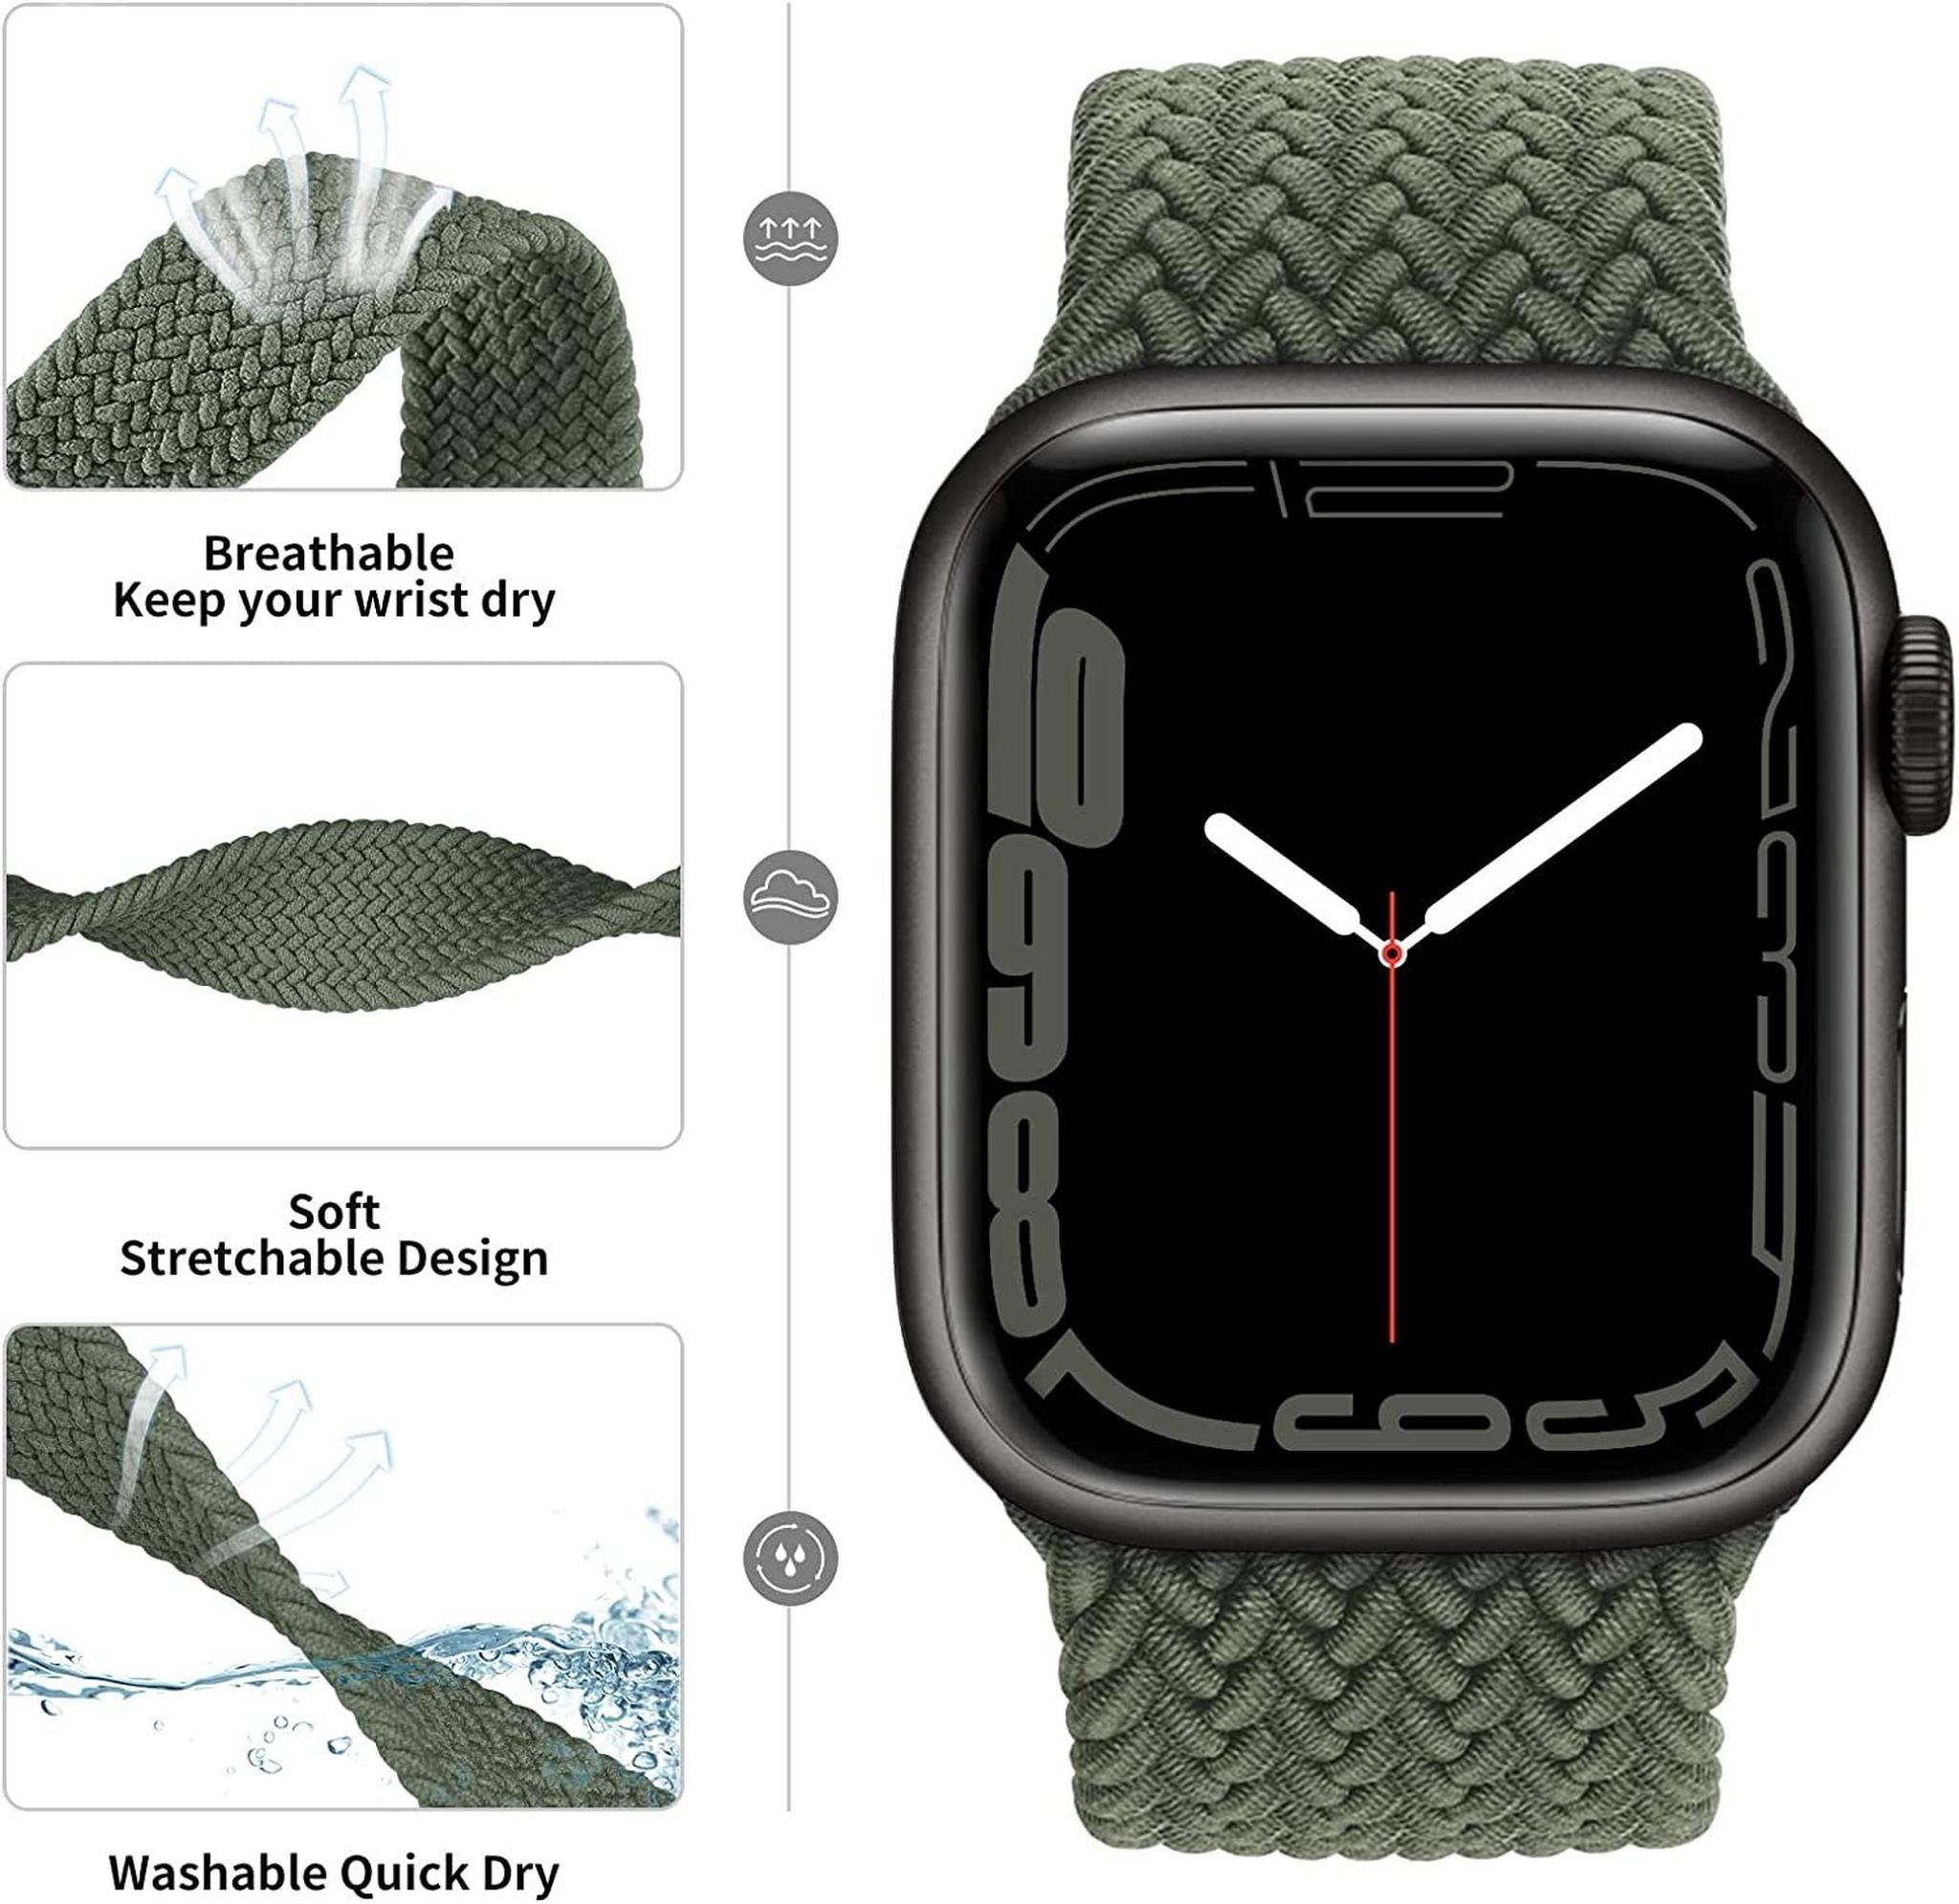 EQ Magnetic Nylon Woven Strap For Apple Watch 45mm - Green